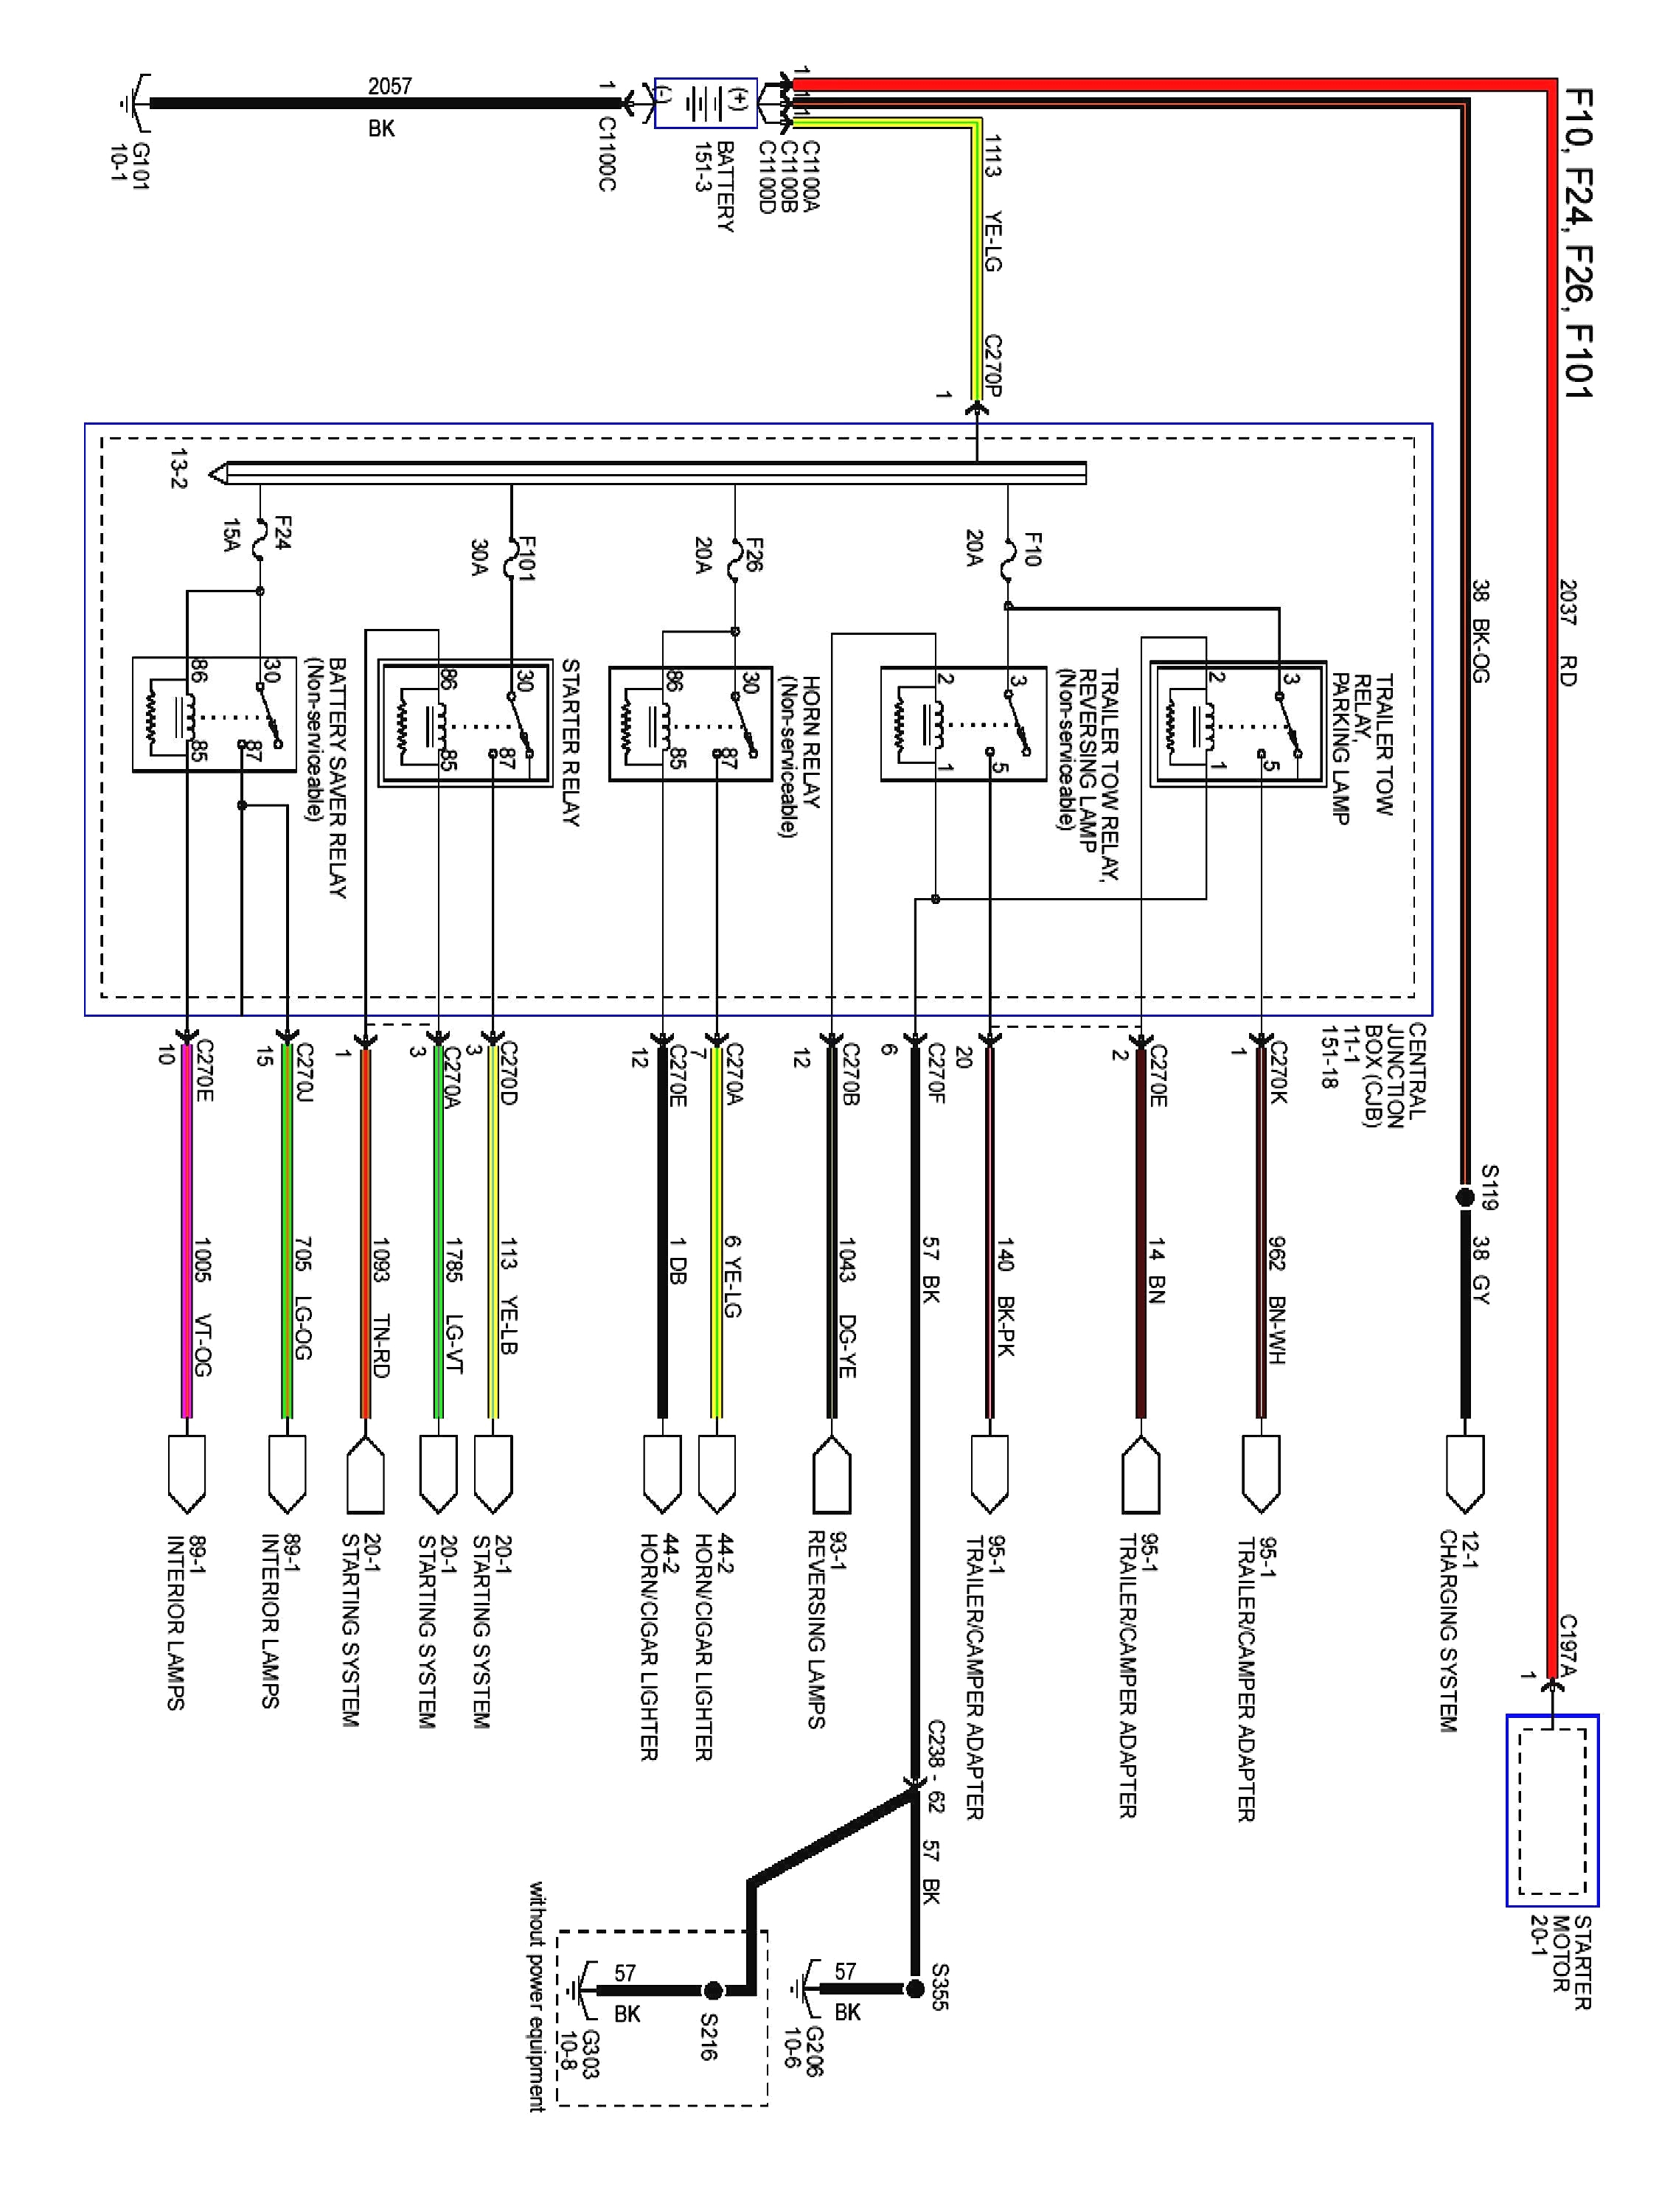 2000 Gmc Sierra Stereo Wiring Diagram from autocardesign.org